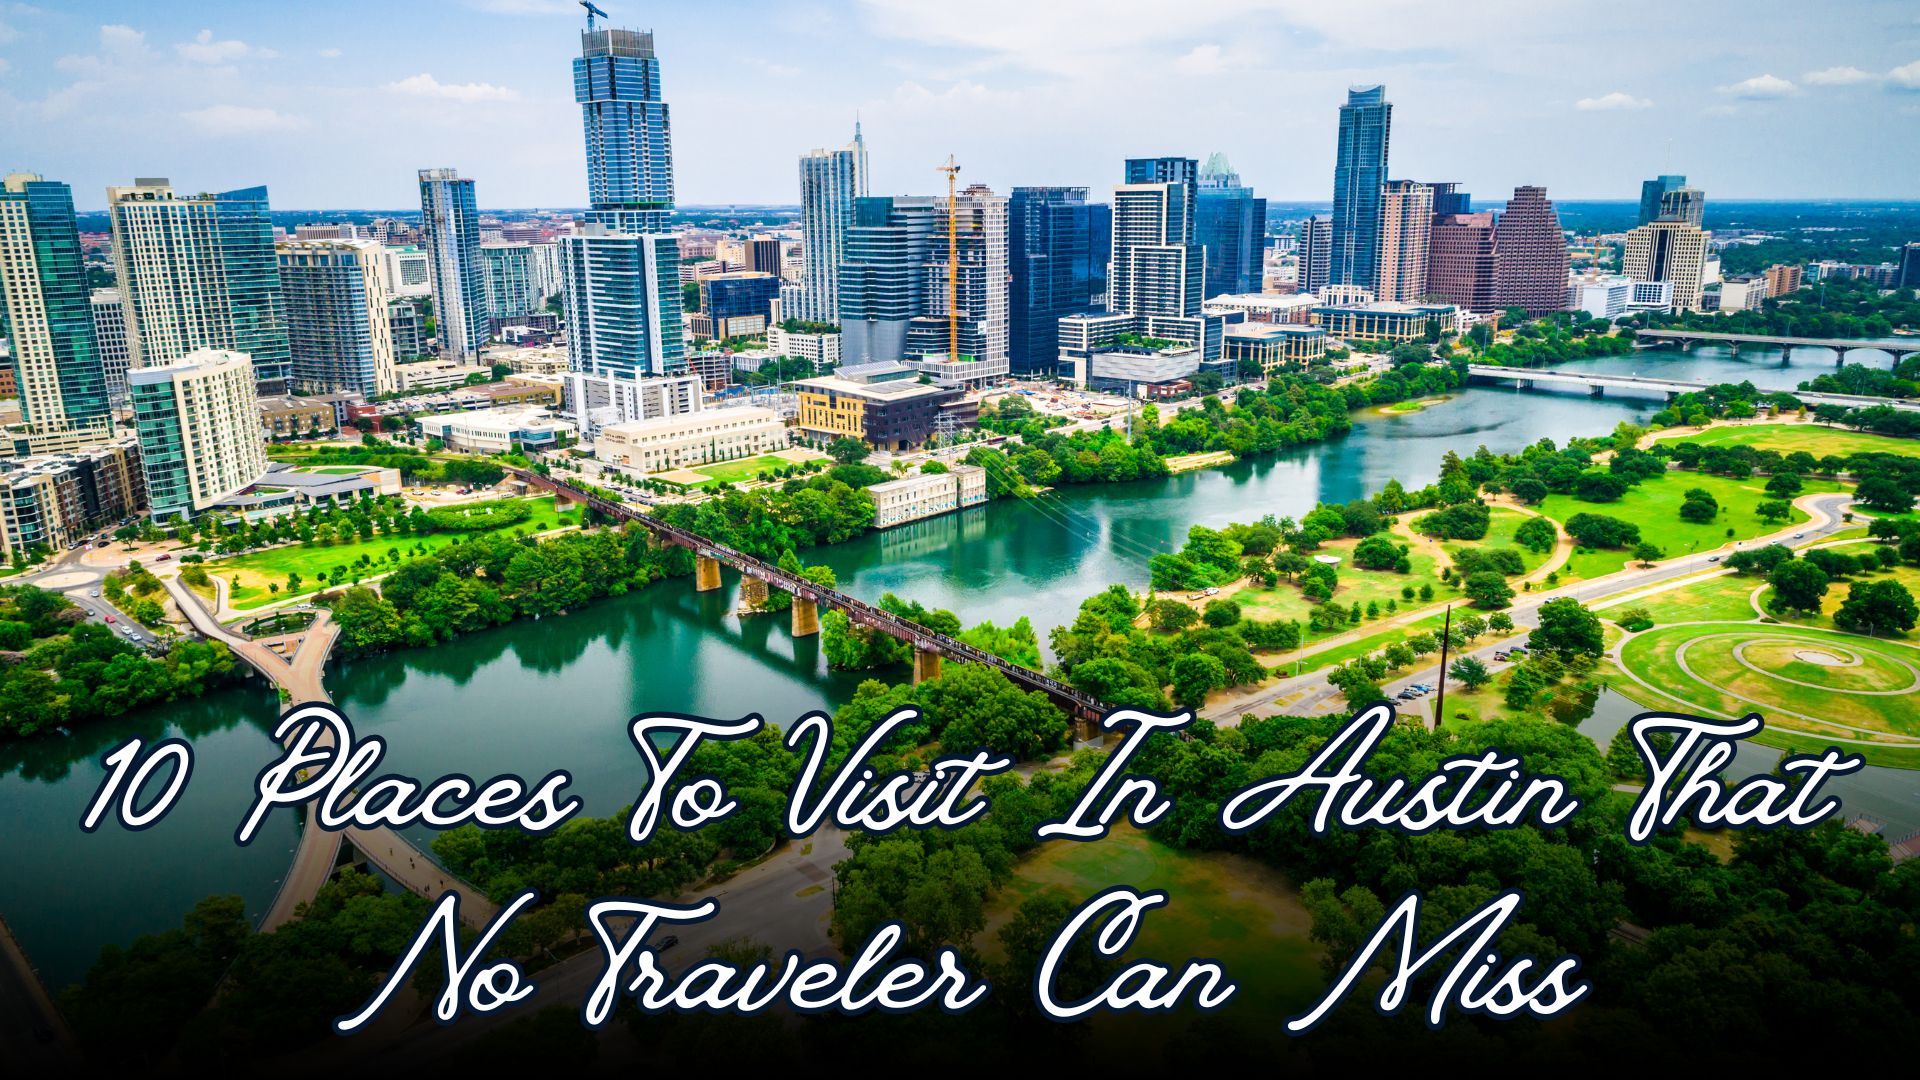 10 Places To Visit In Austin, Buzz On Net